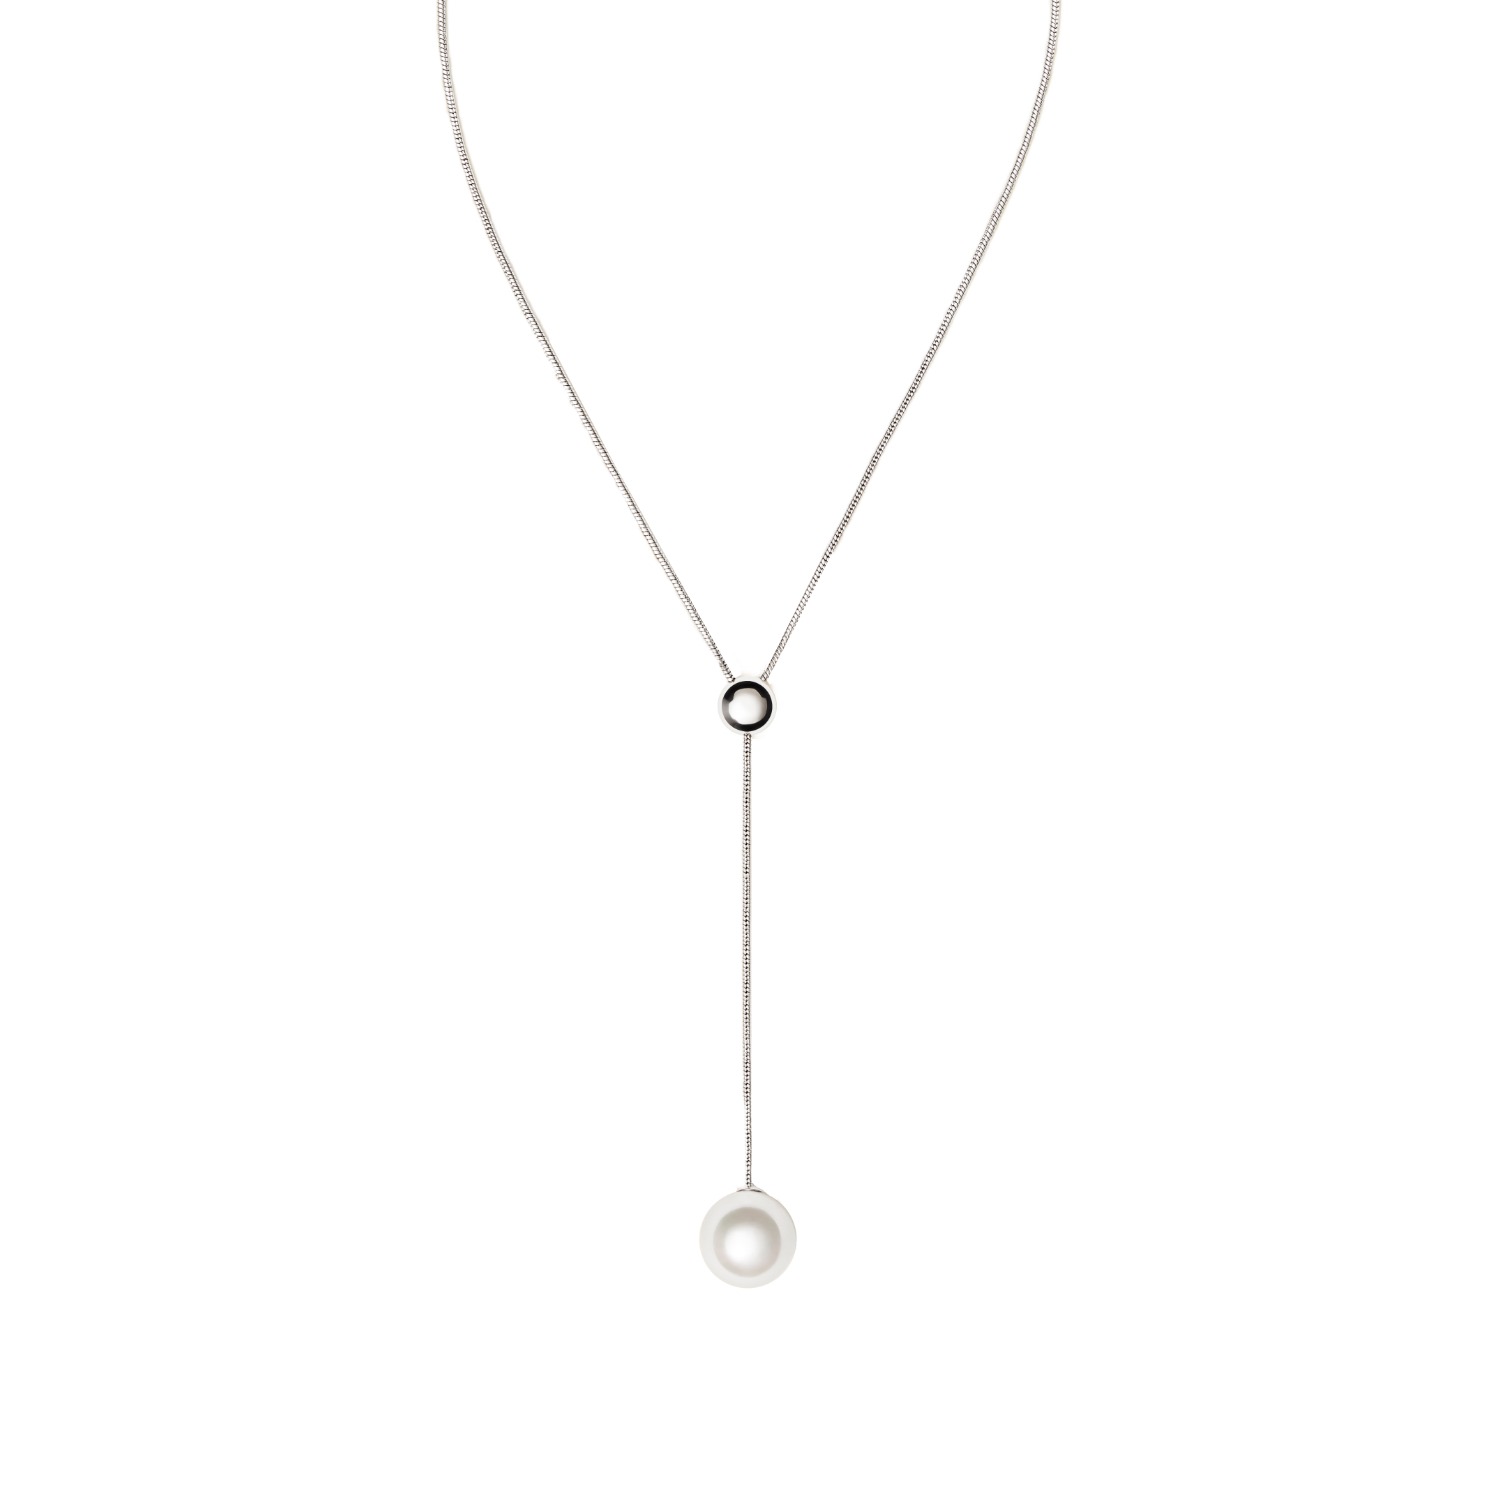 Women’s Minimalism Galet Lariat Necklace - Silver Me30